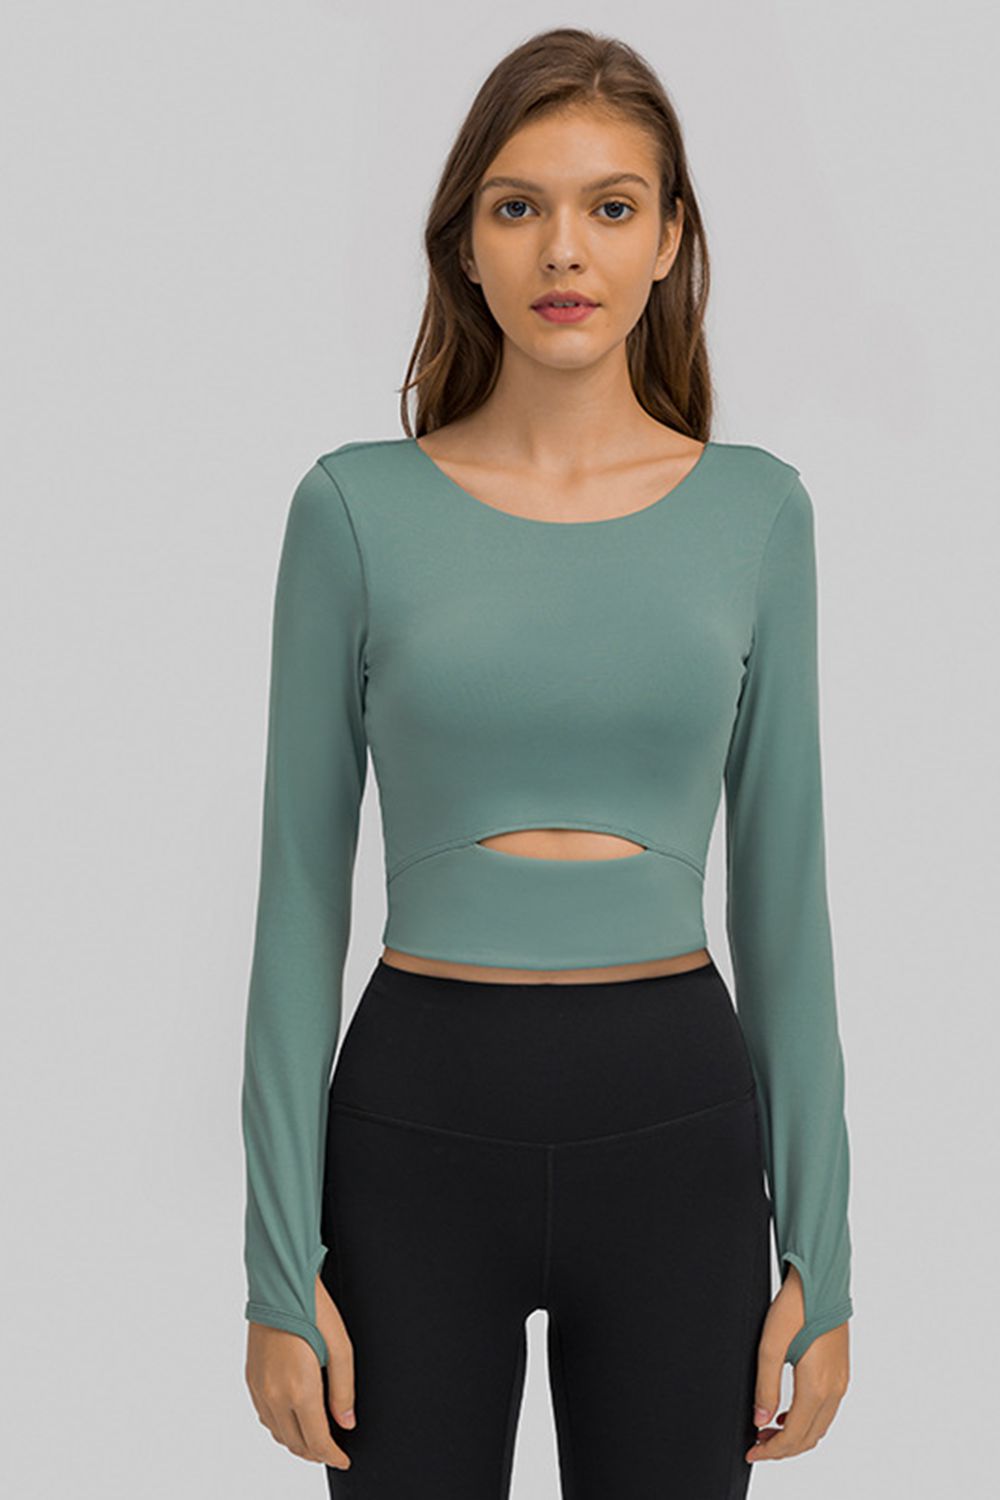 Long Sleeve High-impact Athletic Cut-out Cropped Sports Top